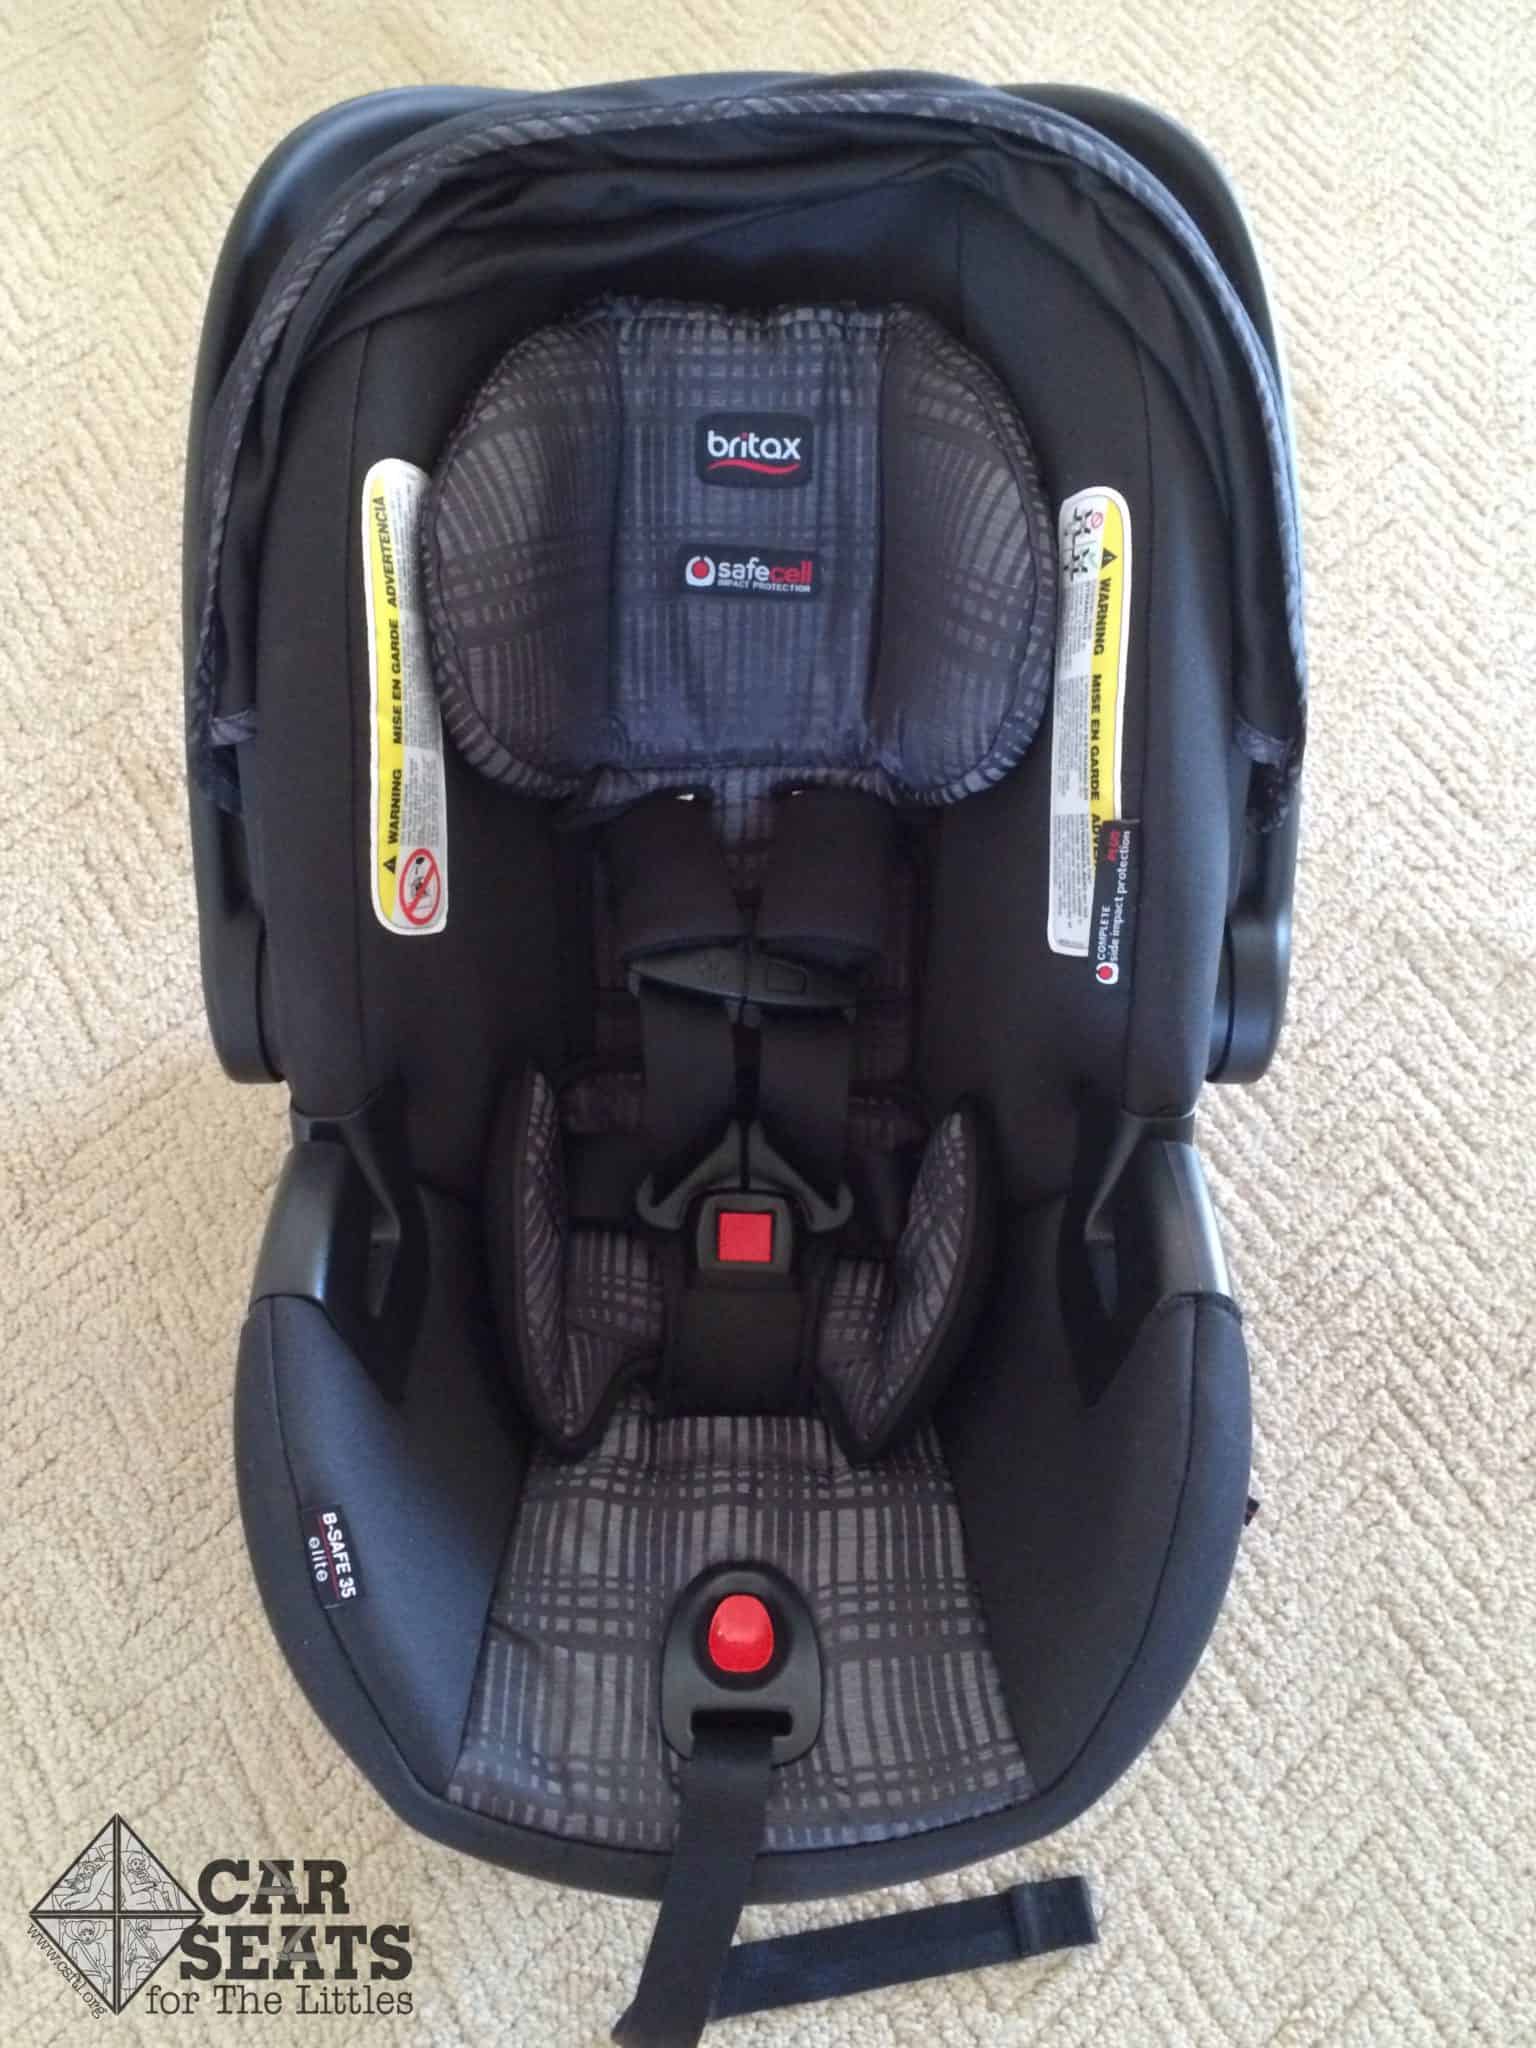 Britax B Safe 35 Elite Review Car Seats For The Littles - Britax Baby Safe Car Seat Weight Limit